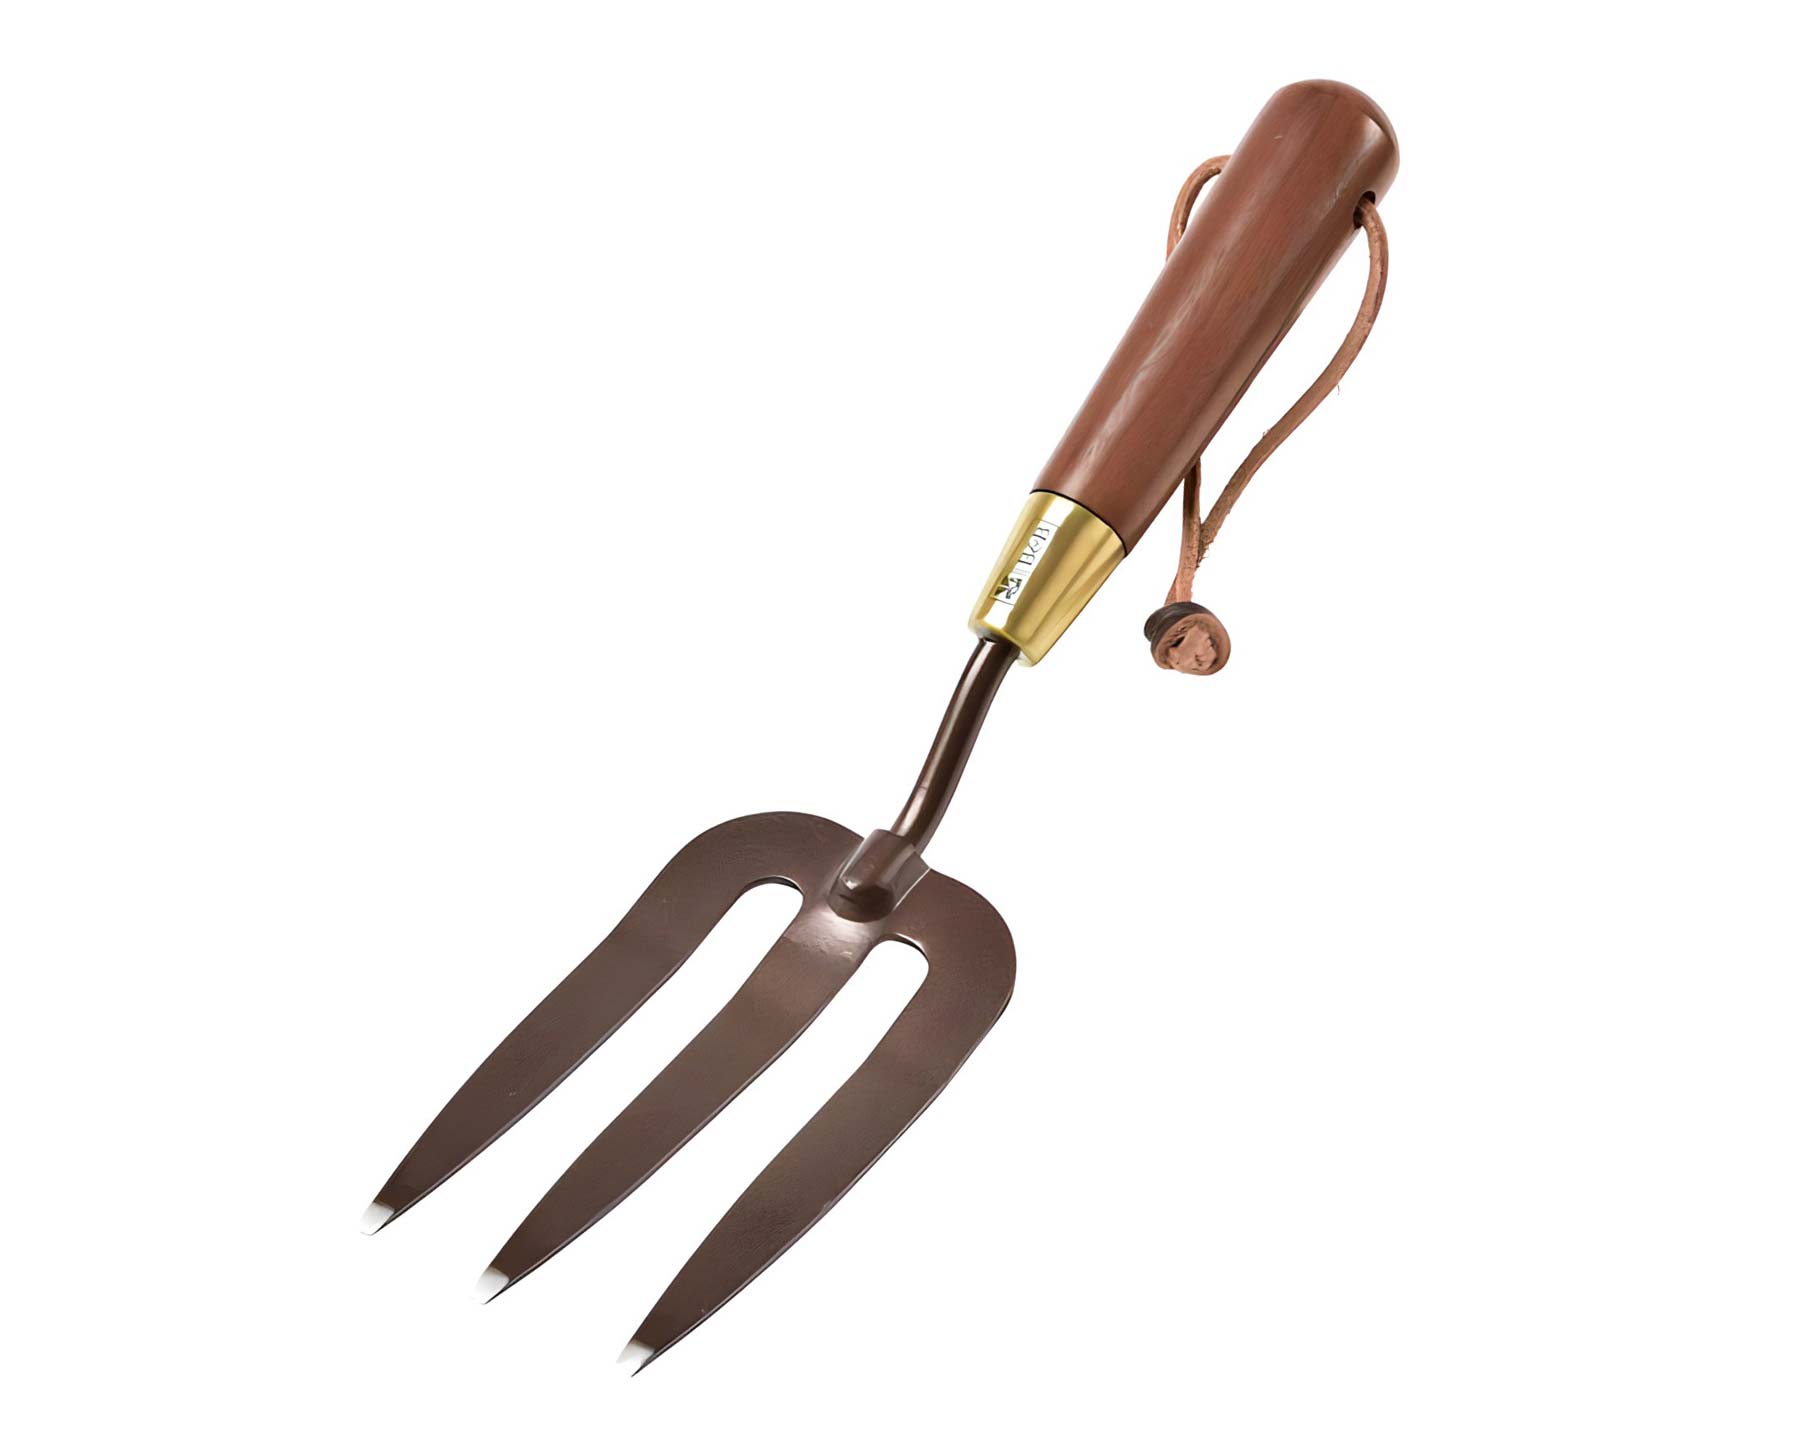 Hand Fork part of the new National Trust range of garden tools by Burgon and Ball